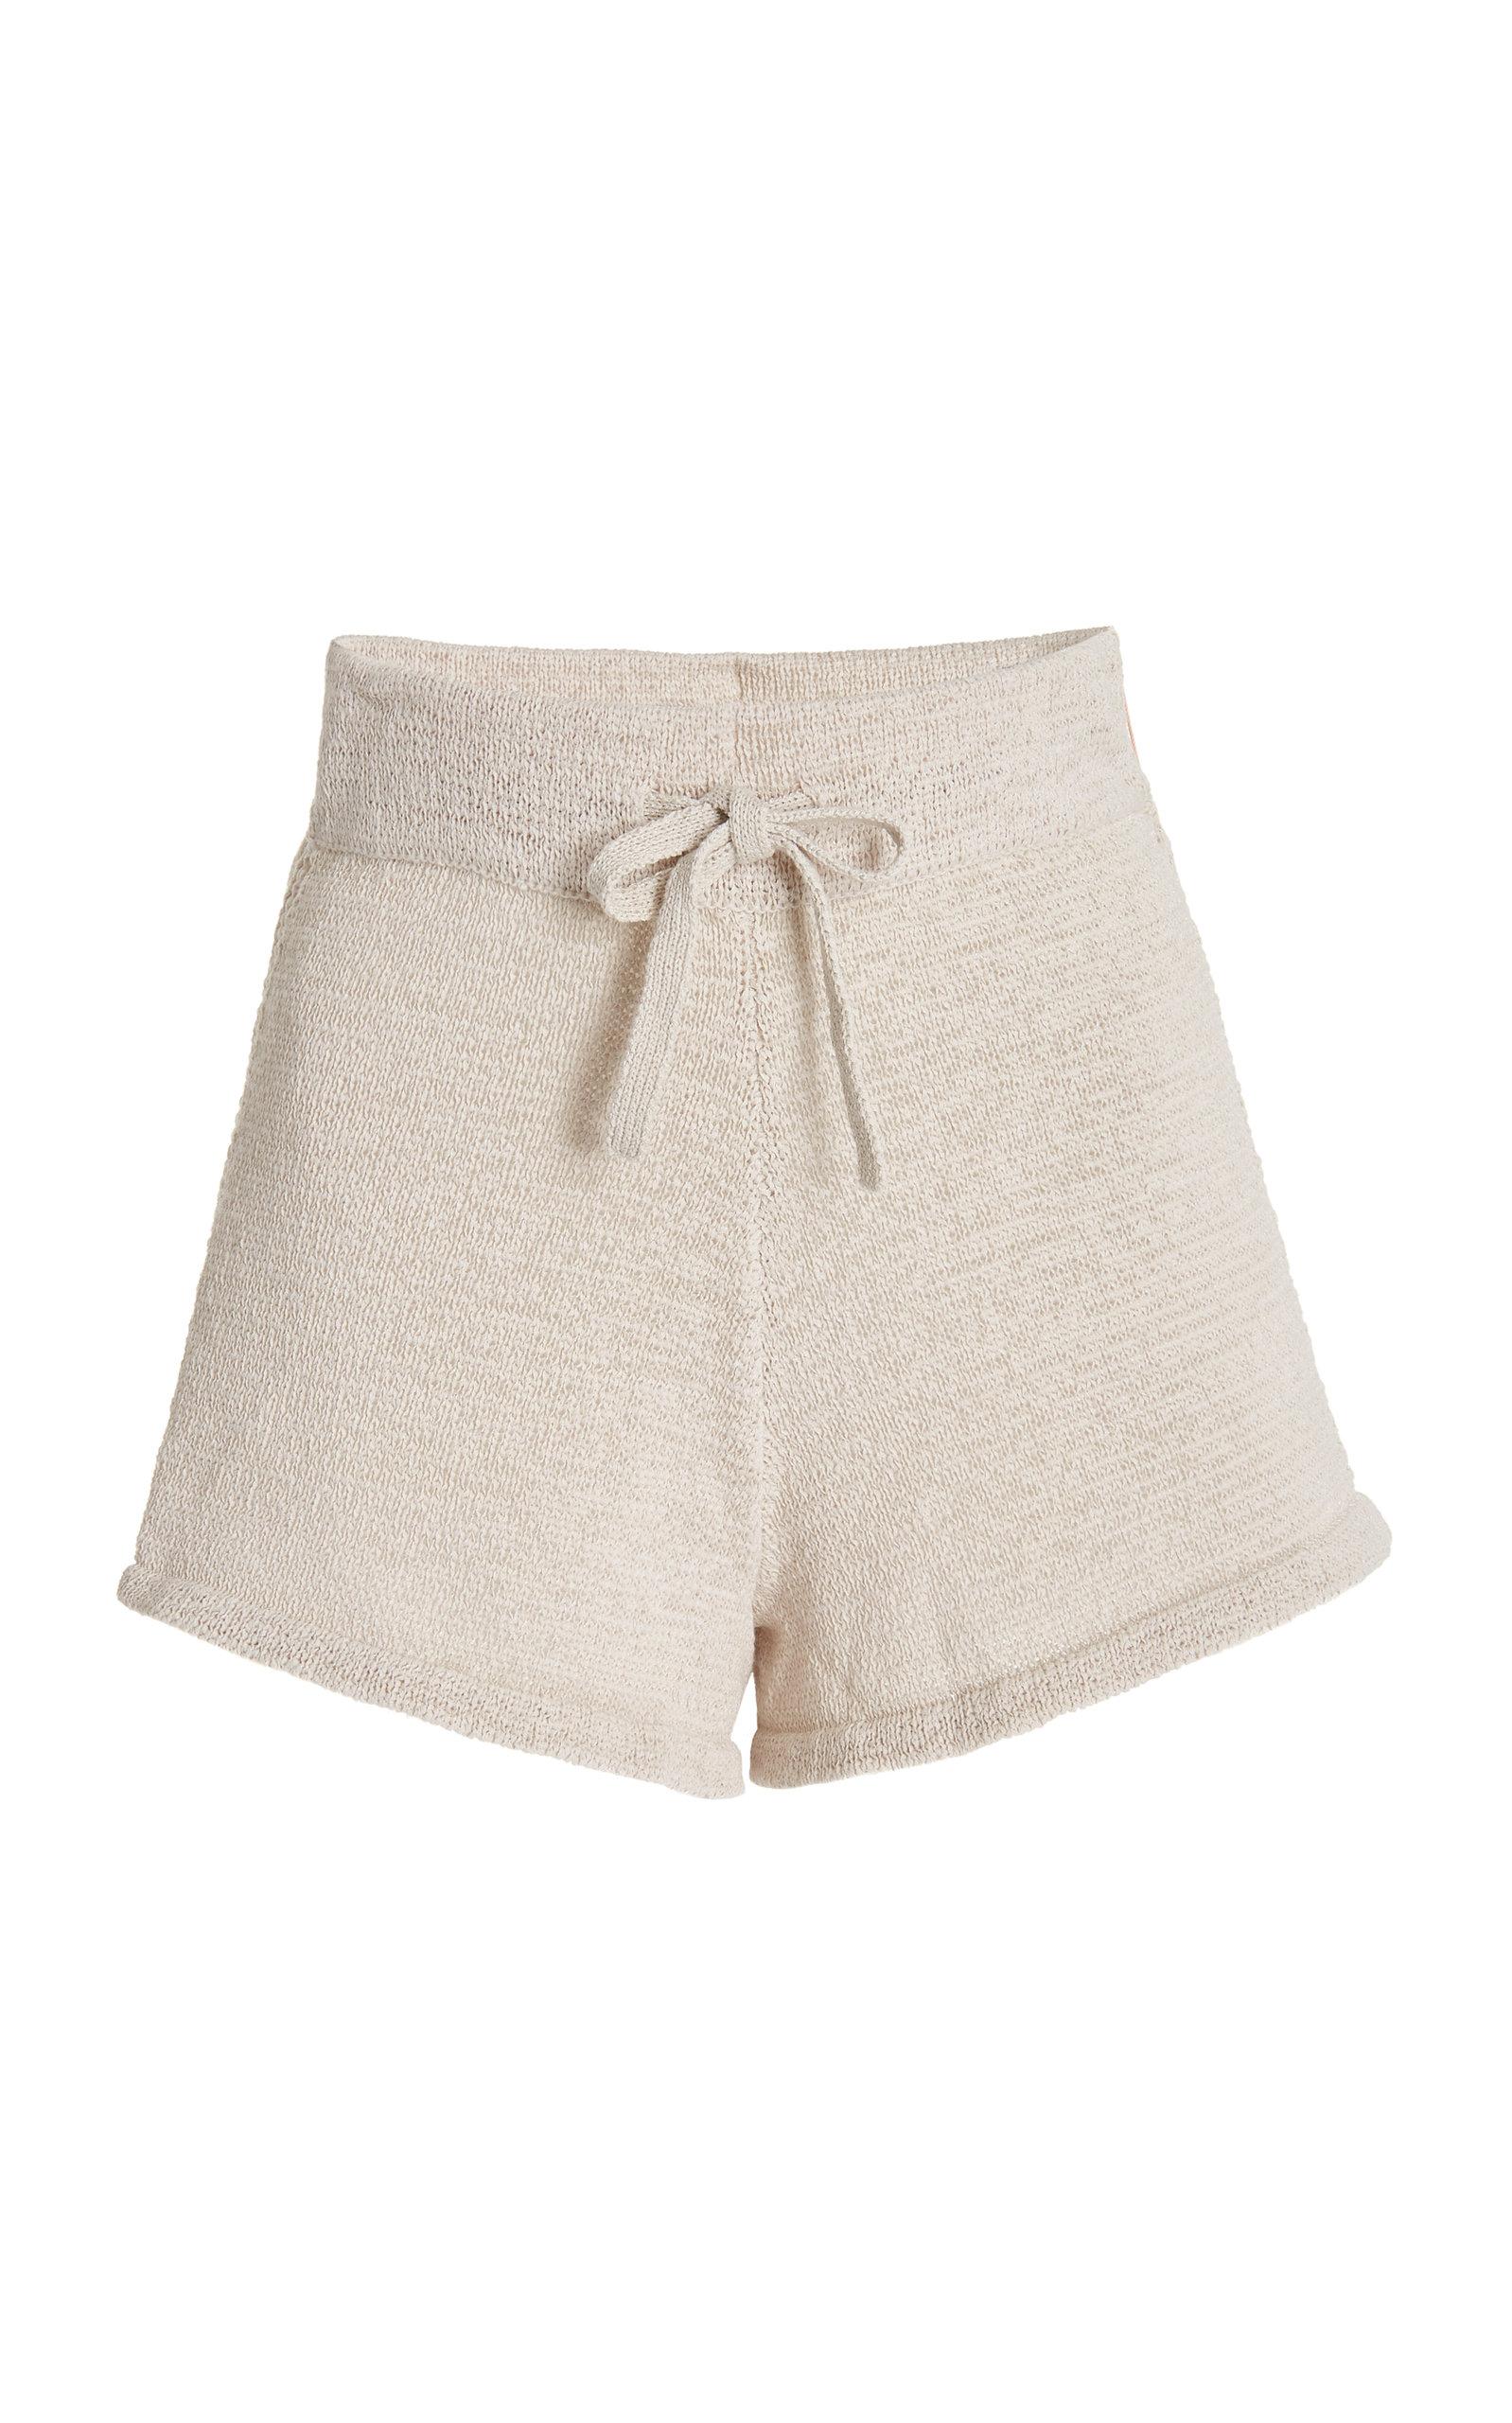 Cult Gaia Mikeah Cotton-blend Knit Shorts in White | Lyst